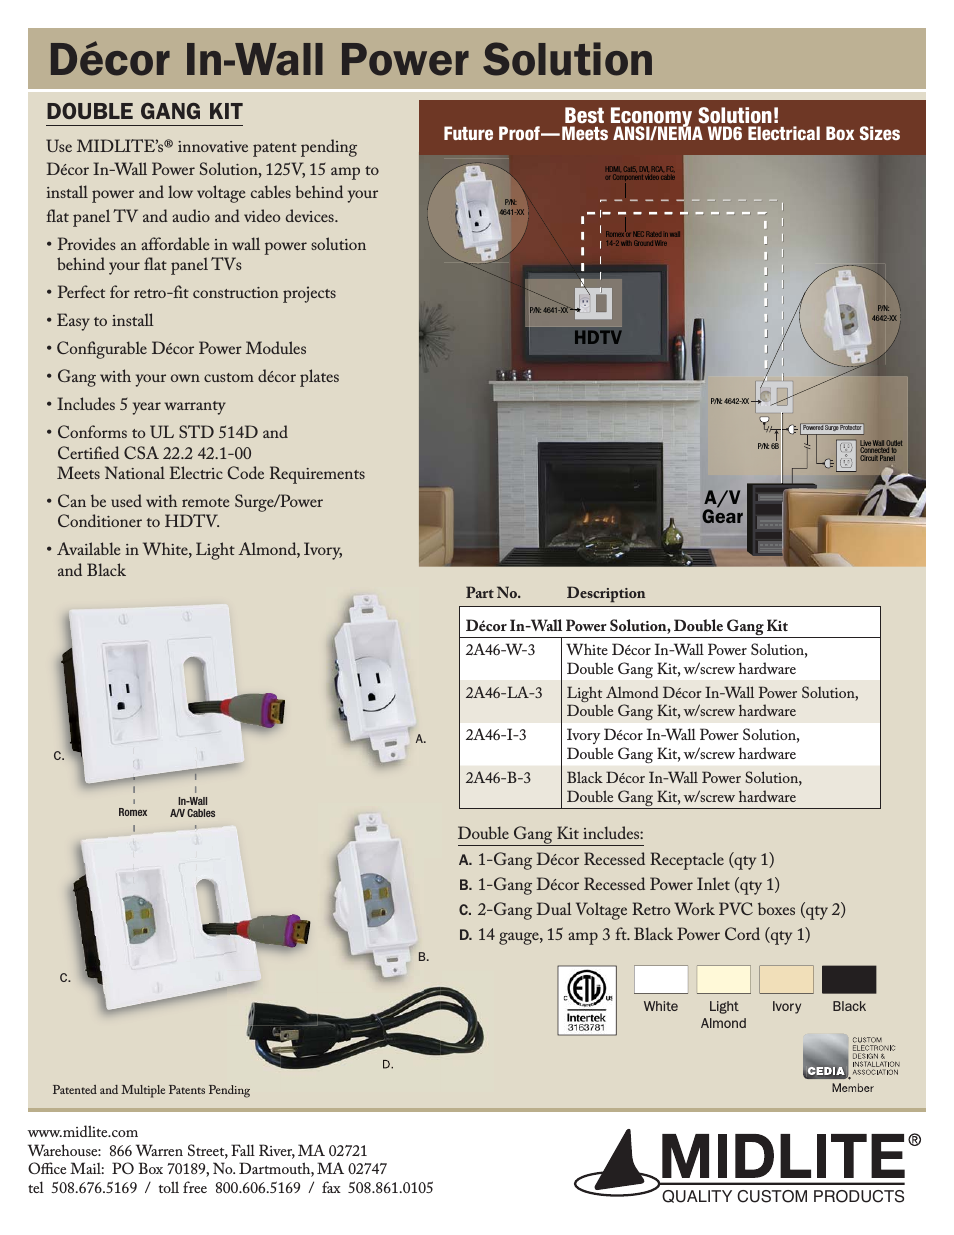 DOUBLE GANG DÉCOR IN-WALL POWER SOLUTION KIT WITH 3 FT CORD